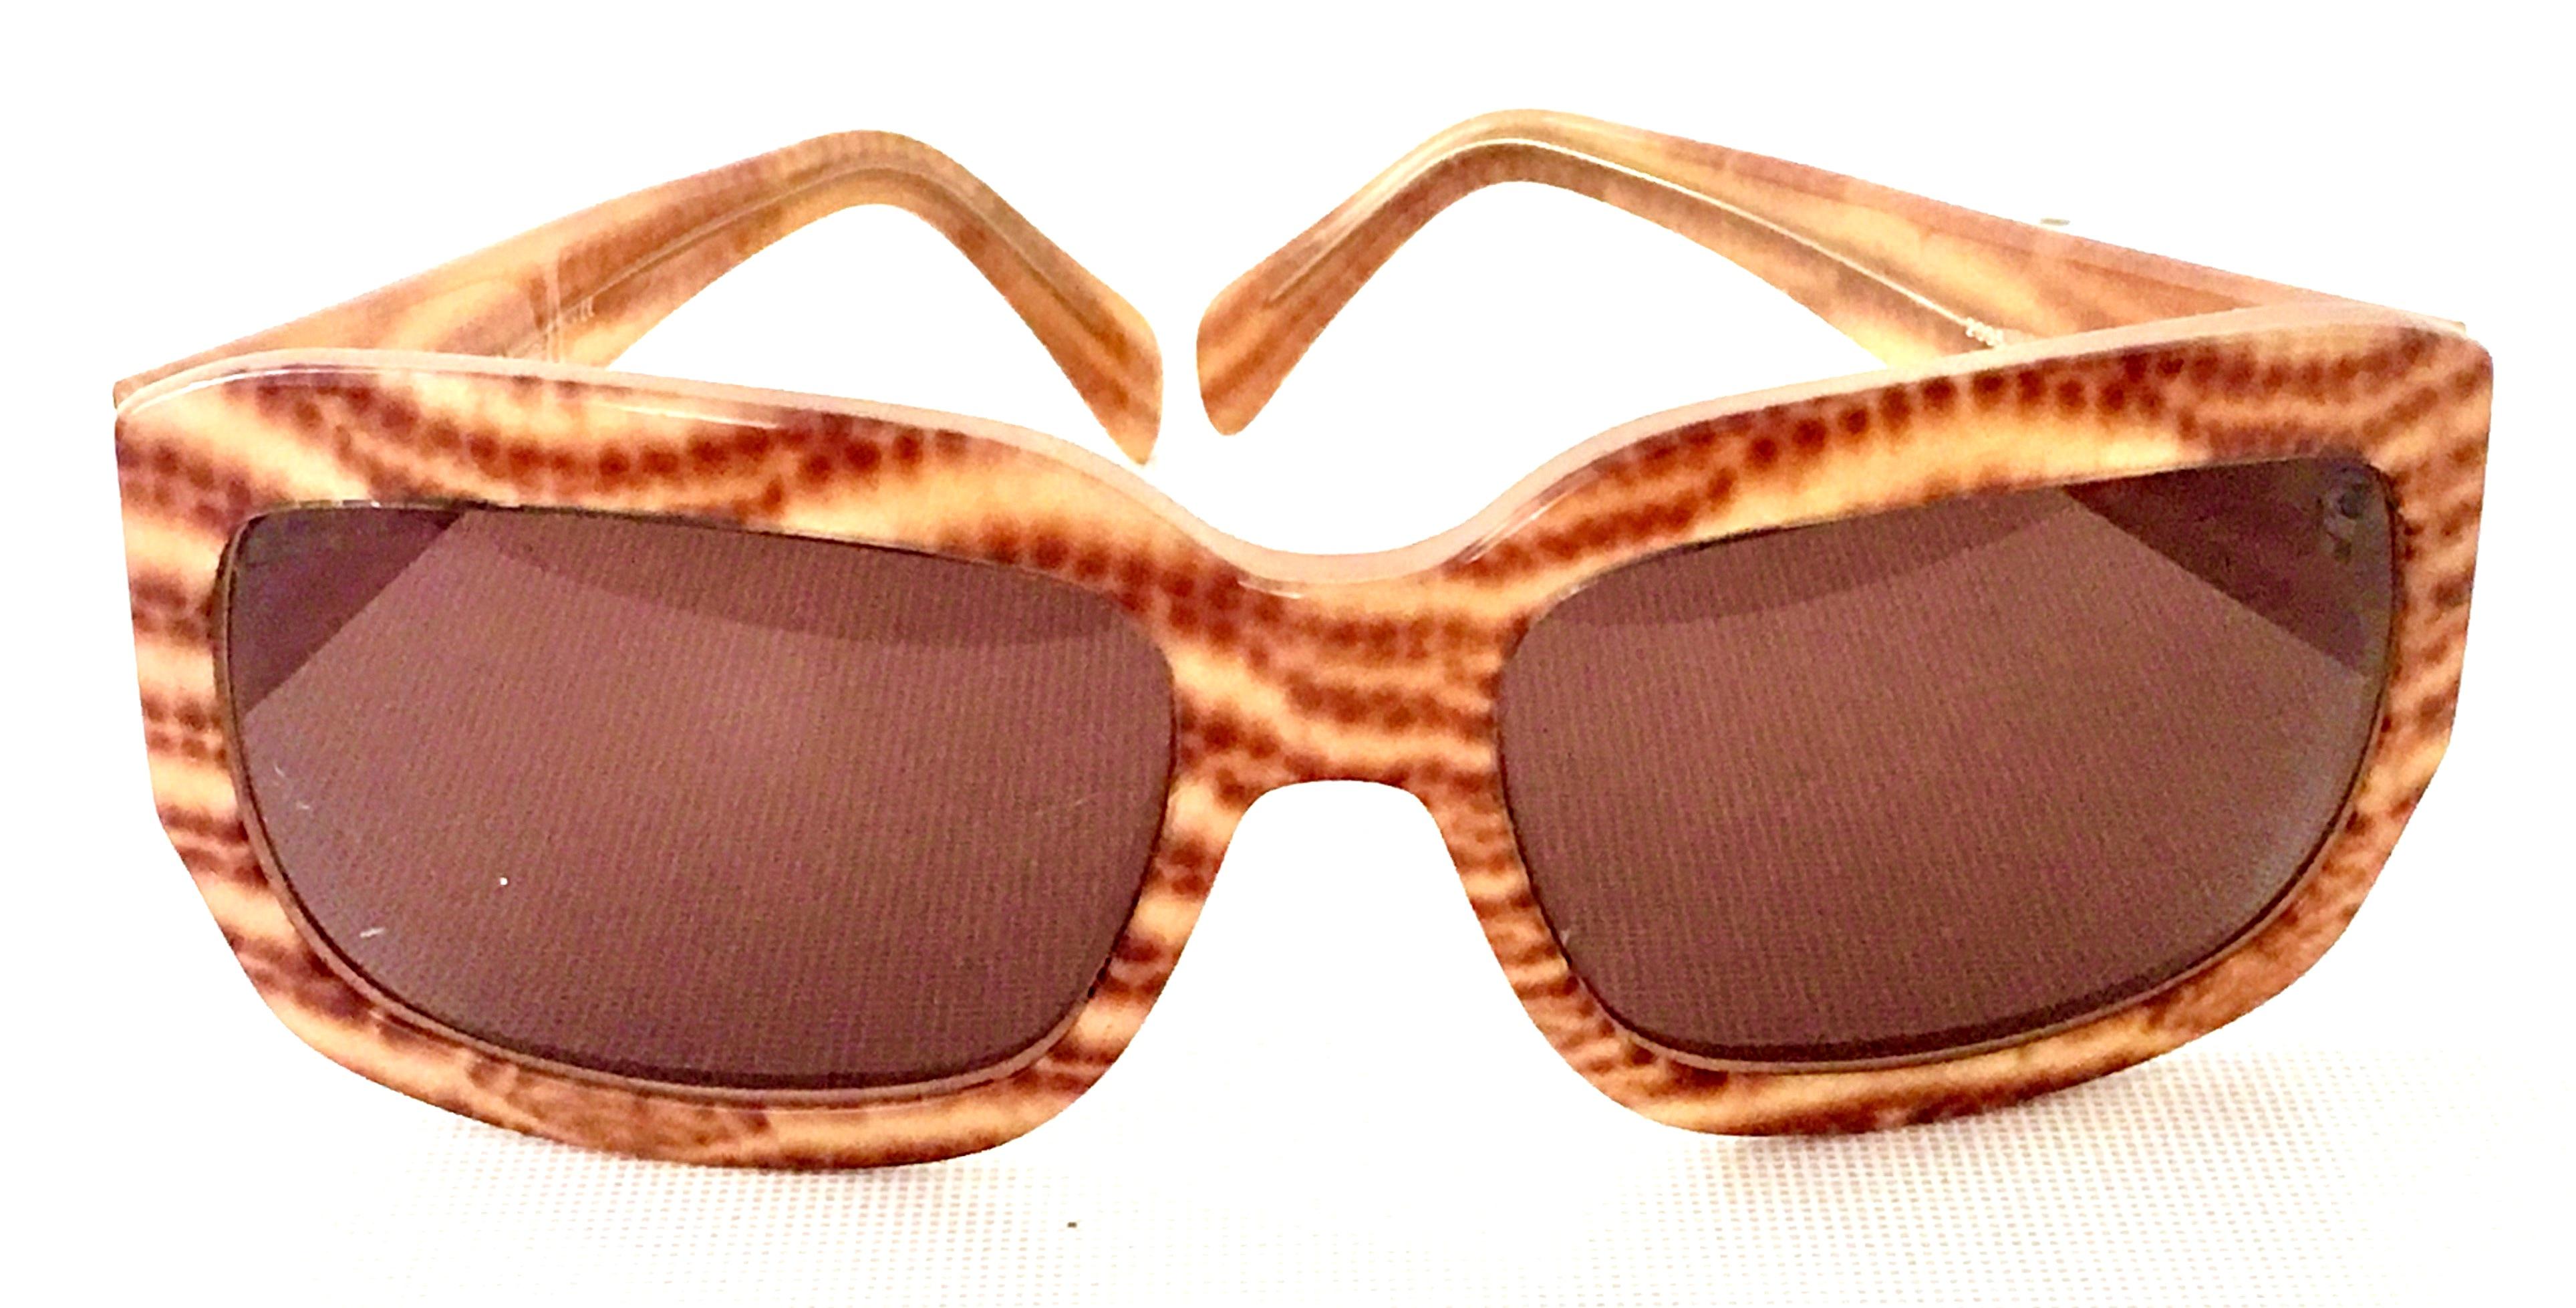 Salvatore Ferragamo abstract animal print sunglasses. Features a subtle amethyst tinted lens with shades of brown frames. Signed Salvatore Ferragamo, Made In Italy. #2035 239/63. Includes original red Salvatore Ferragamo protective carrying